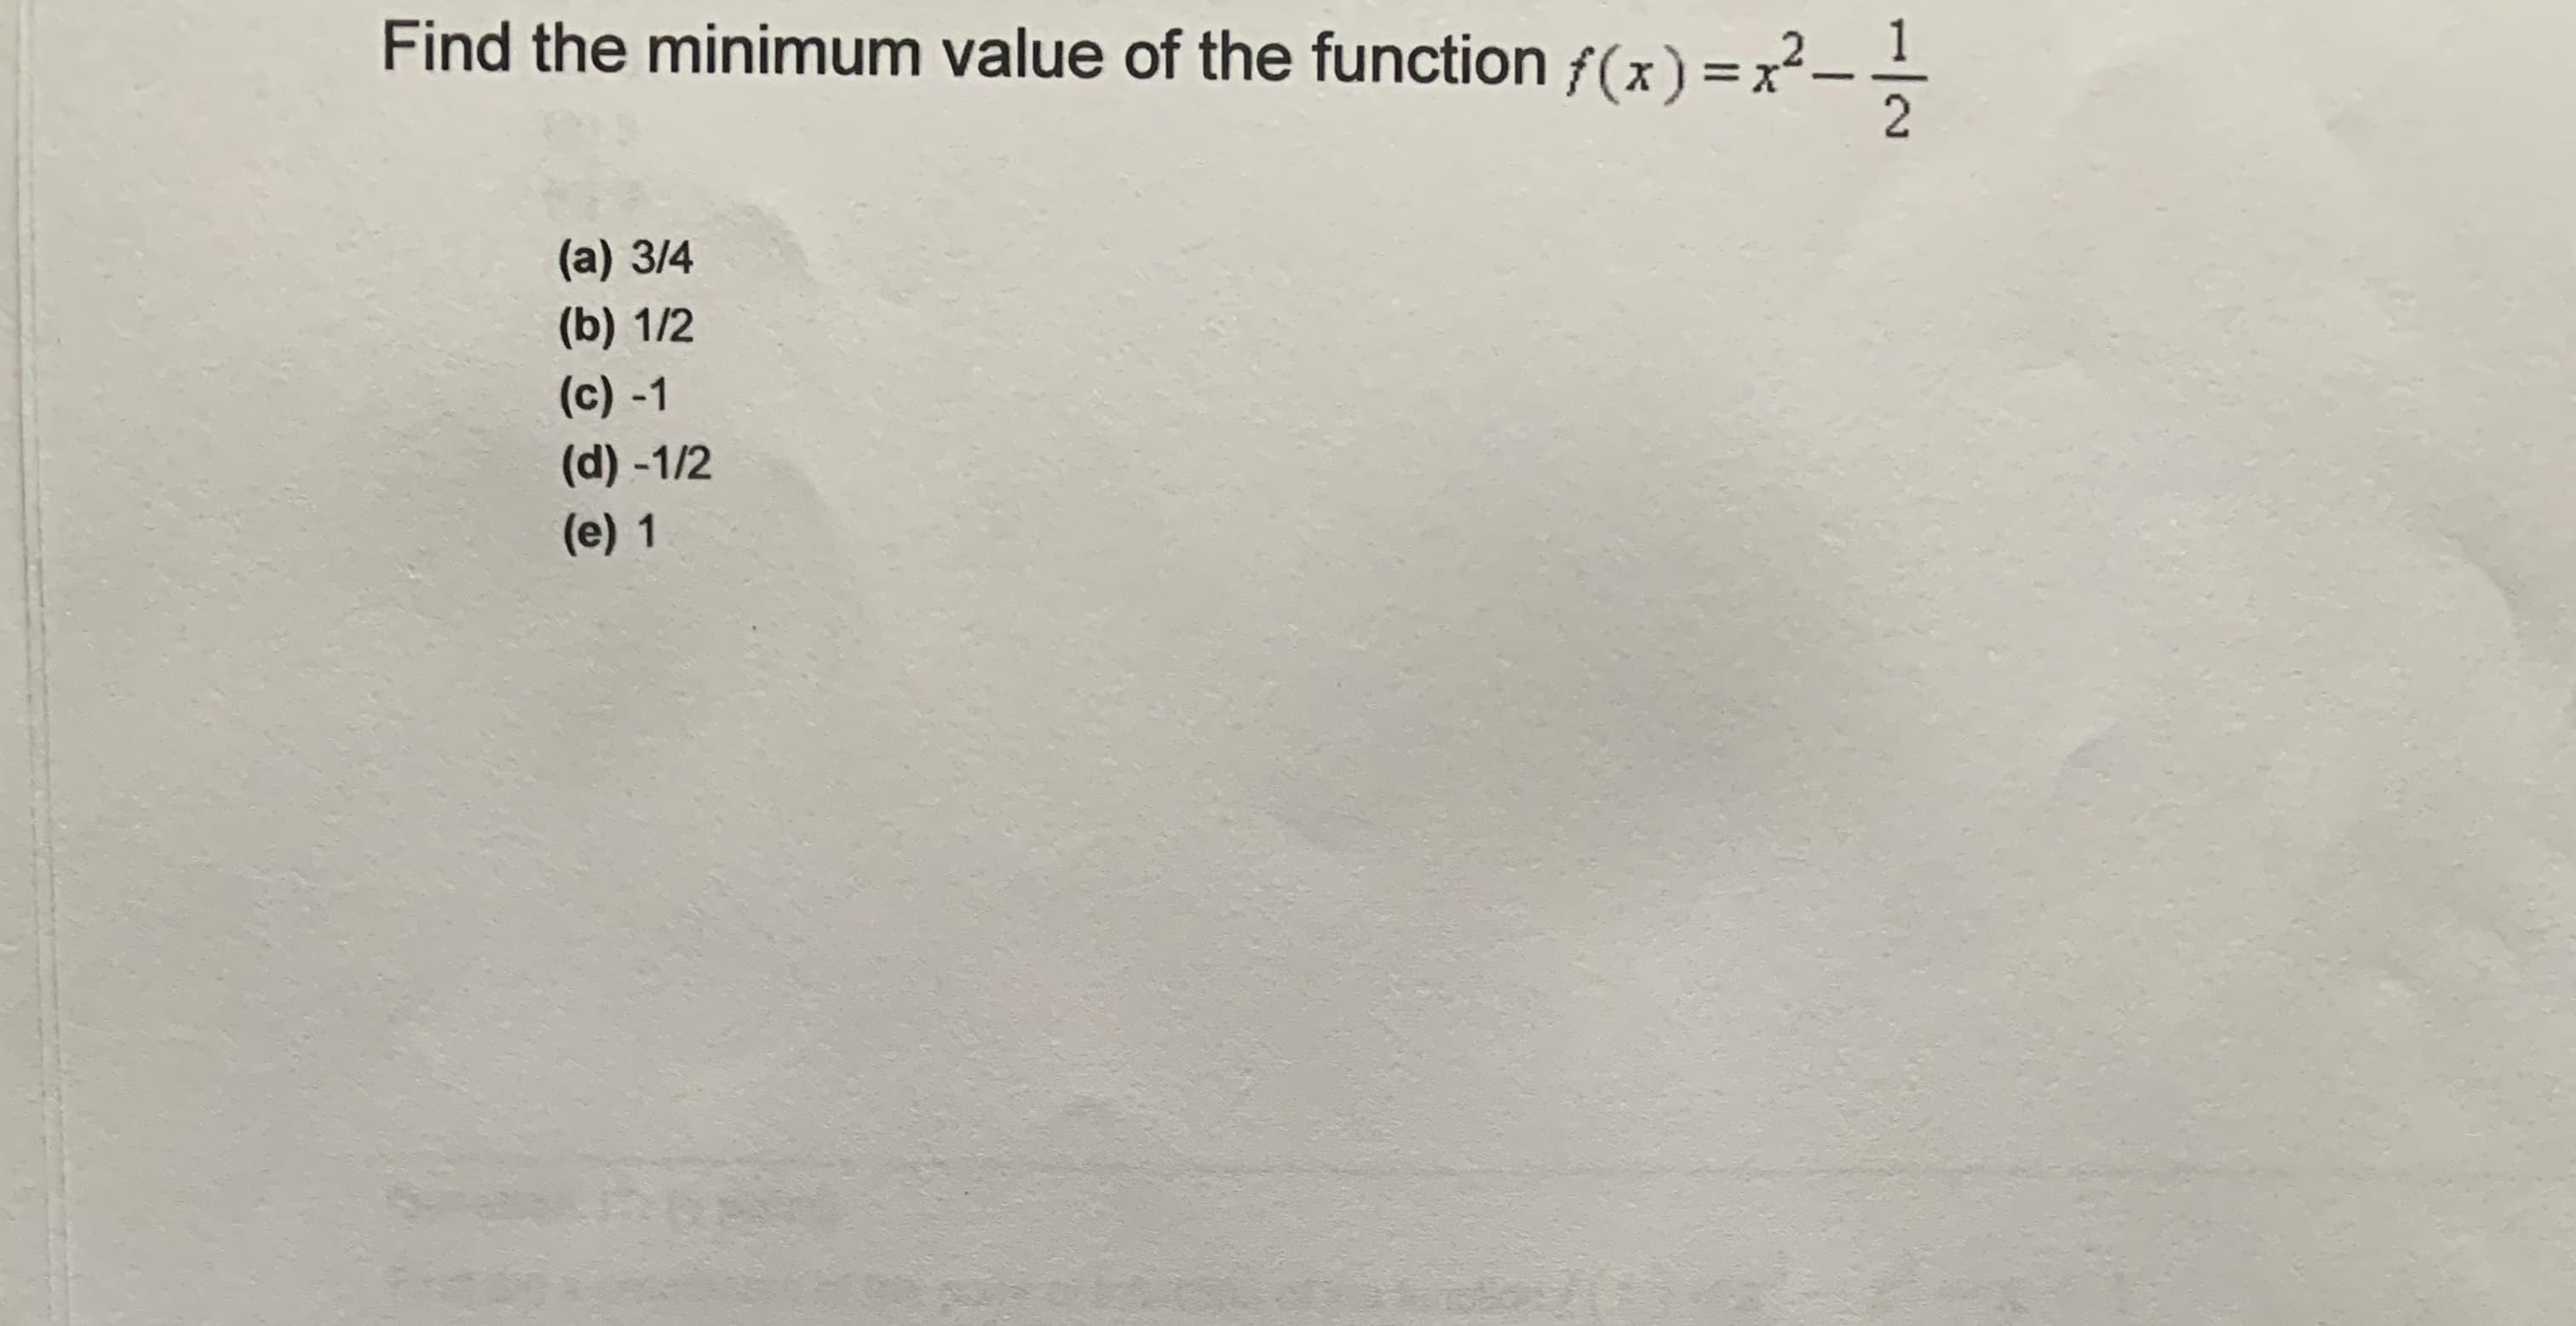 Find the minimum value of the function f(x) =x²--
(a) 3/4
(b) 1/2
(c) -1
(d) -1/2
(e) 1
